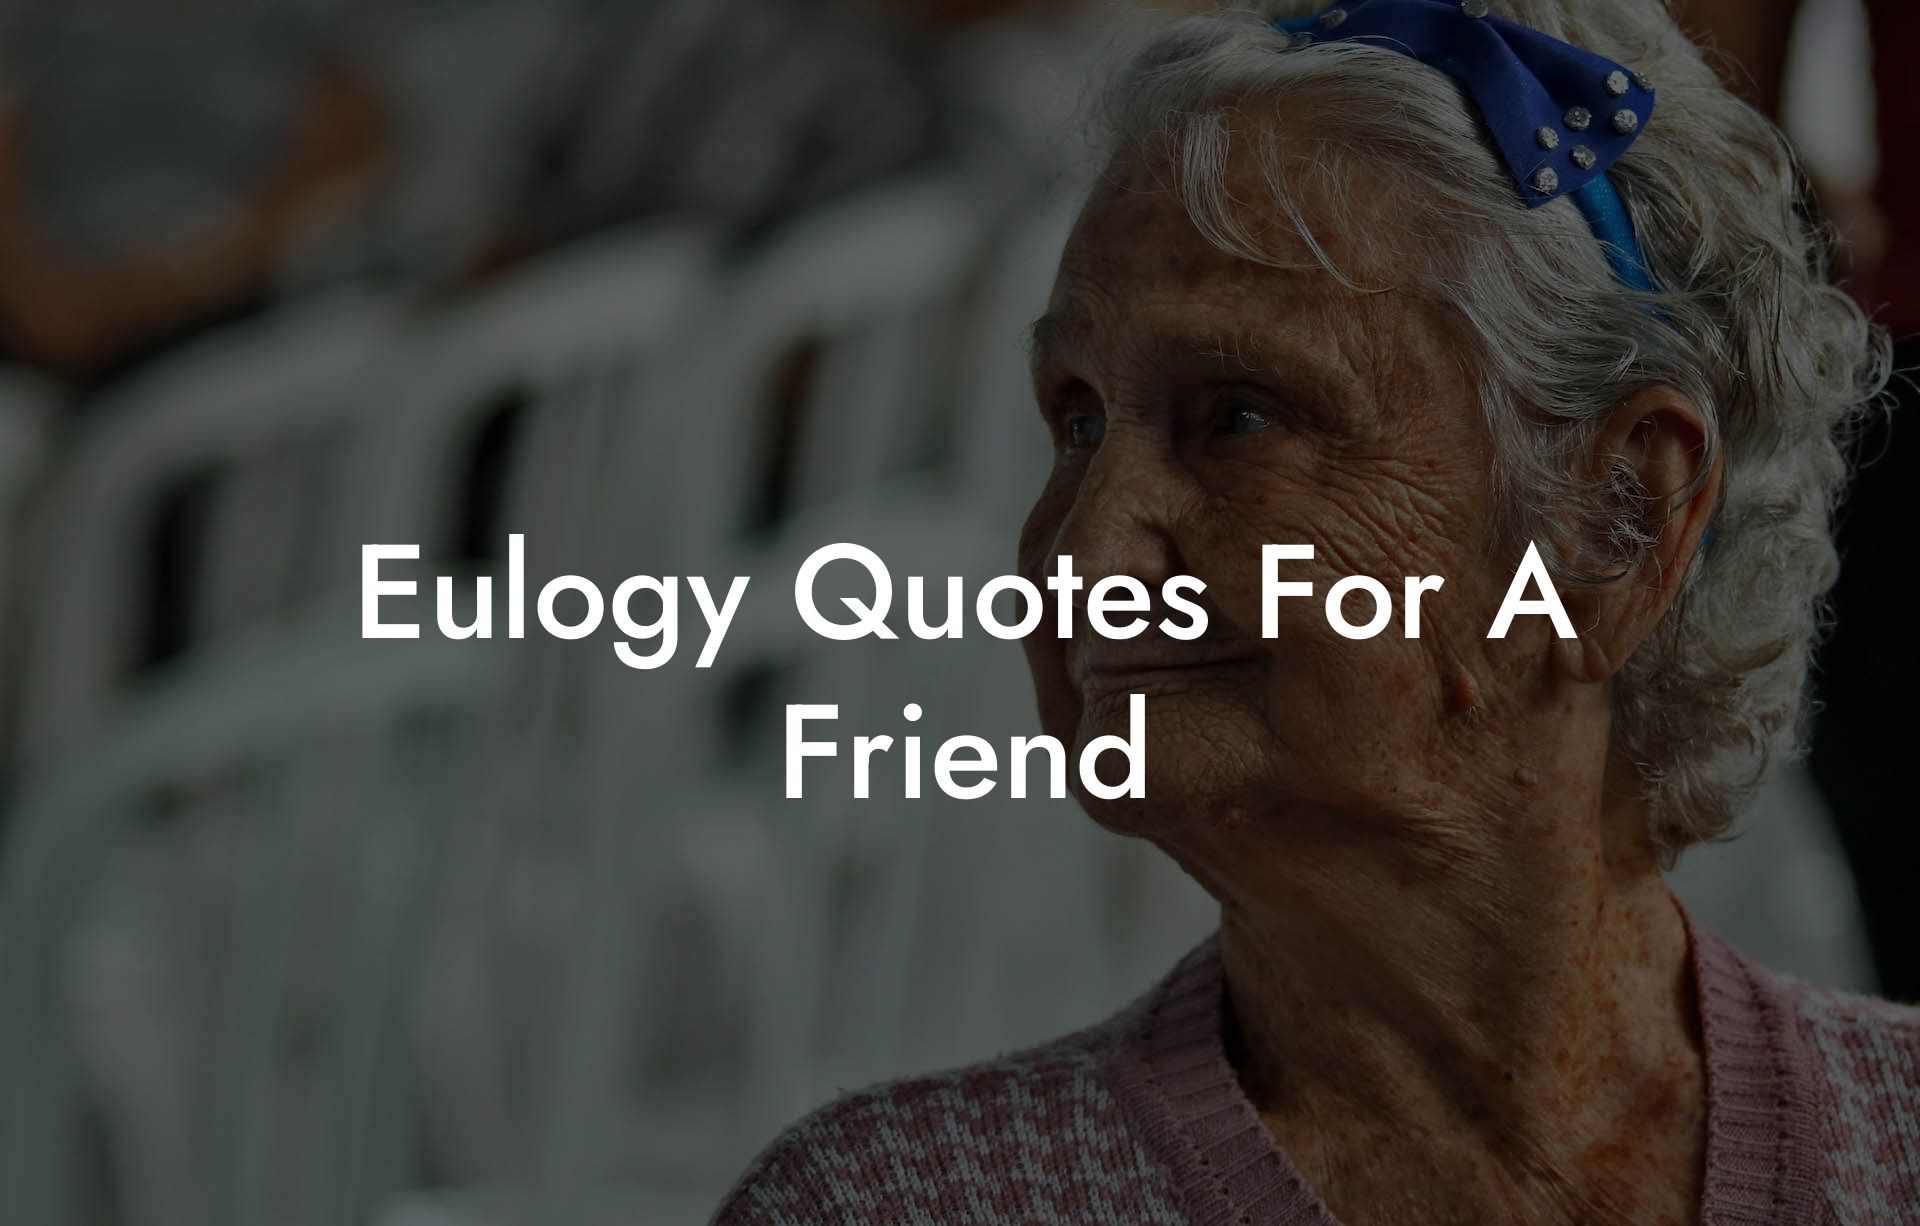 Eulogy Quotes For A Friend